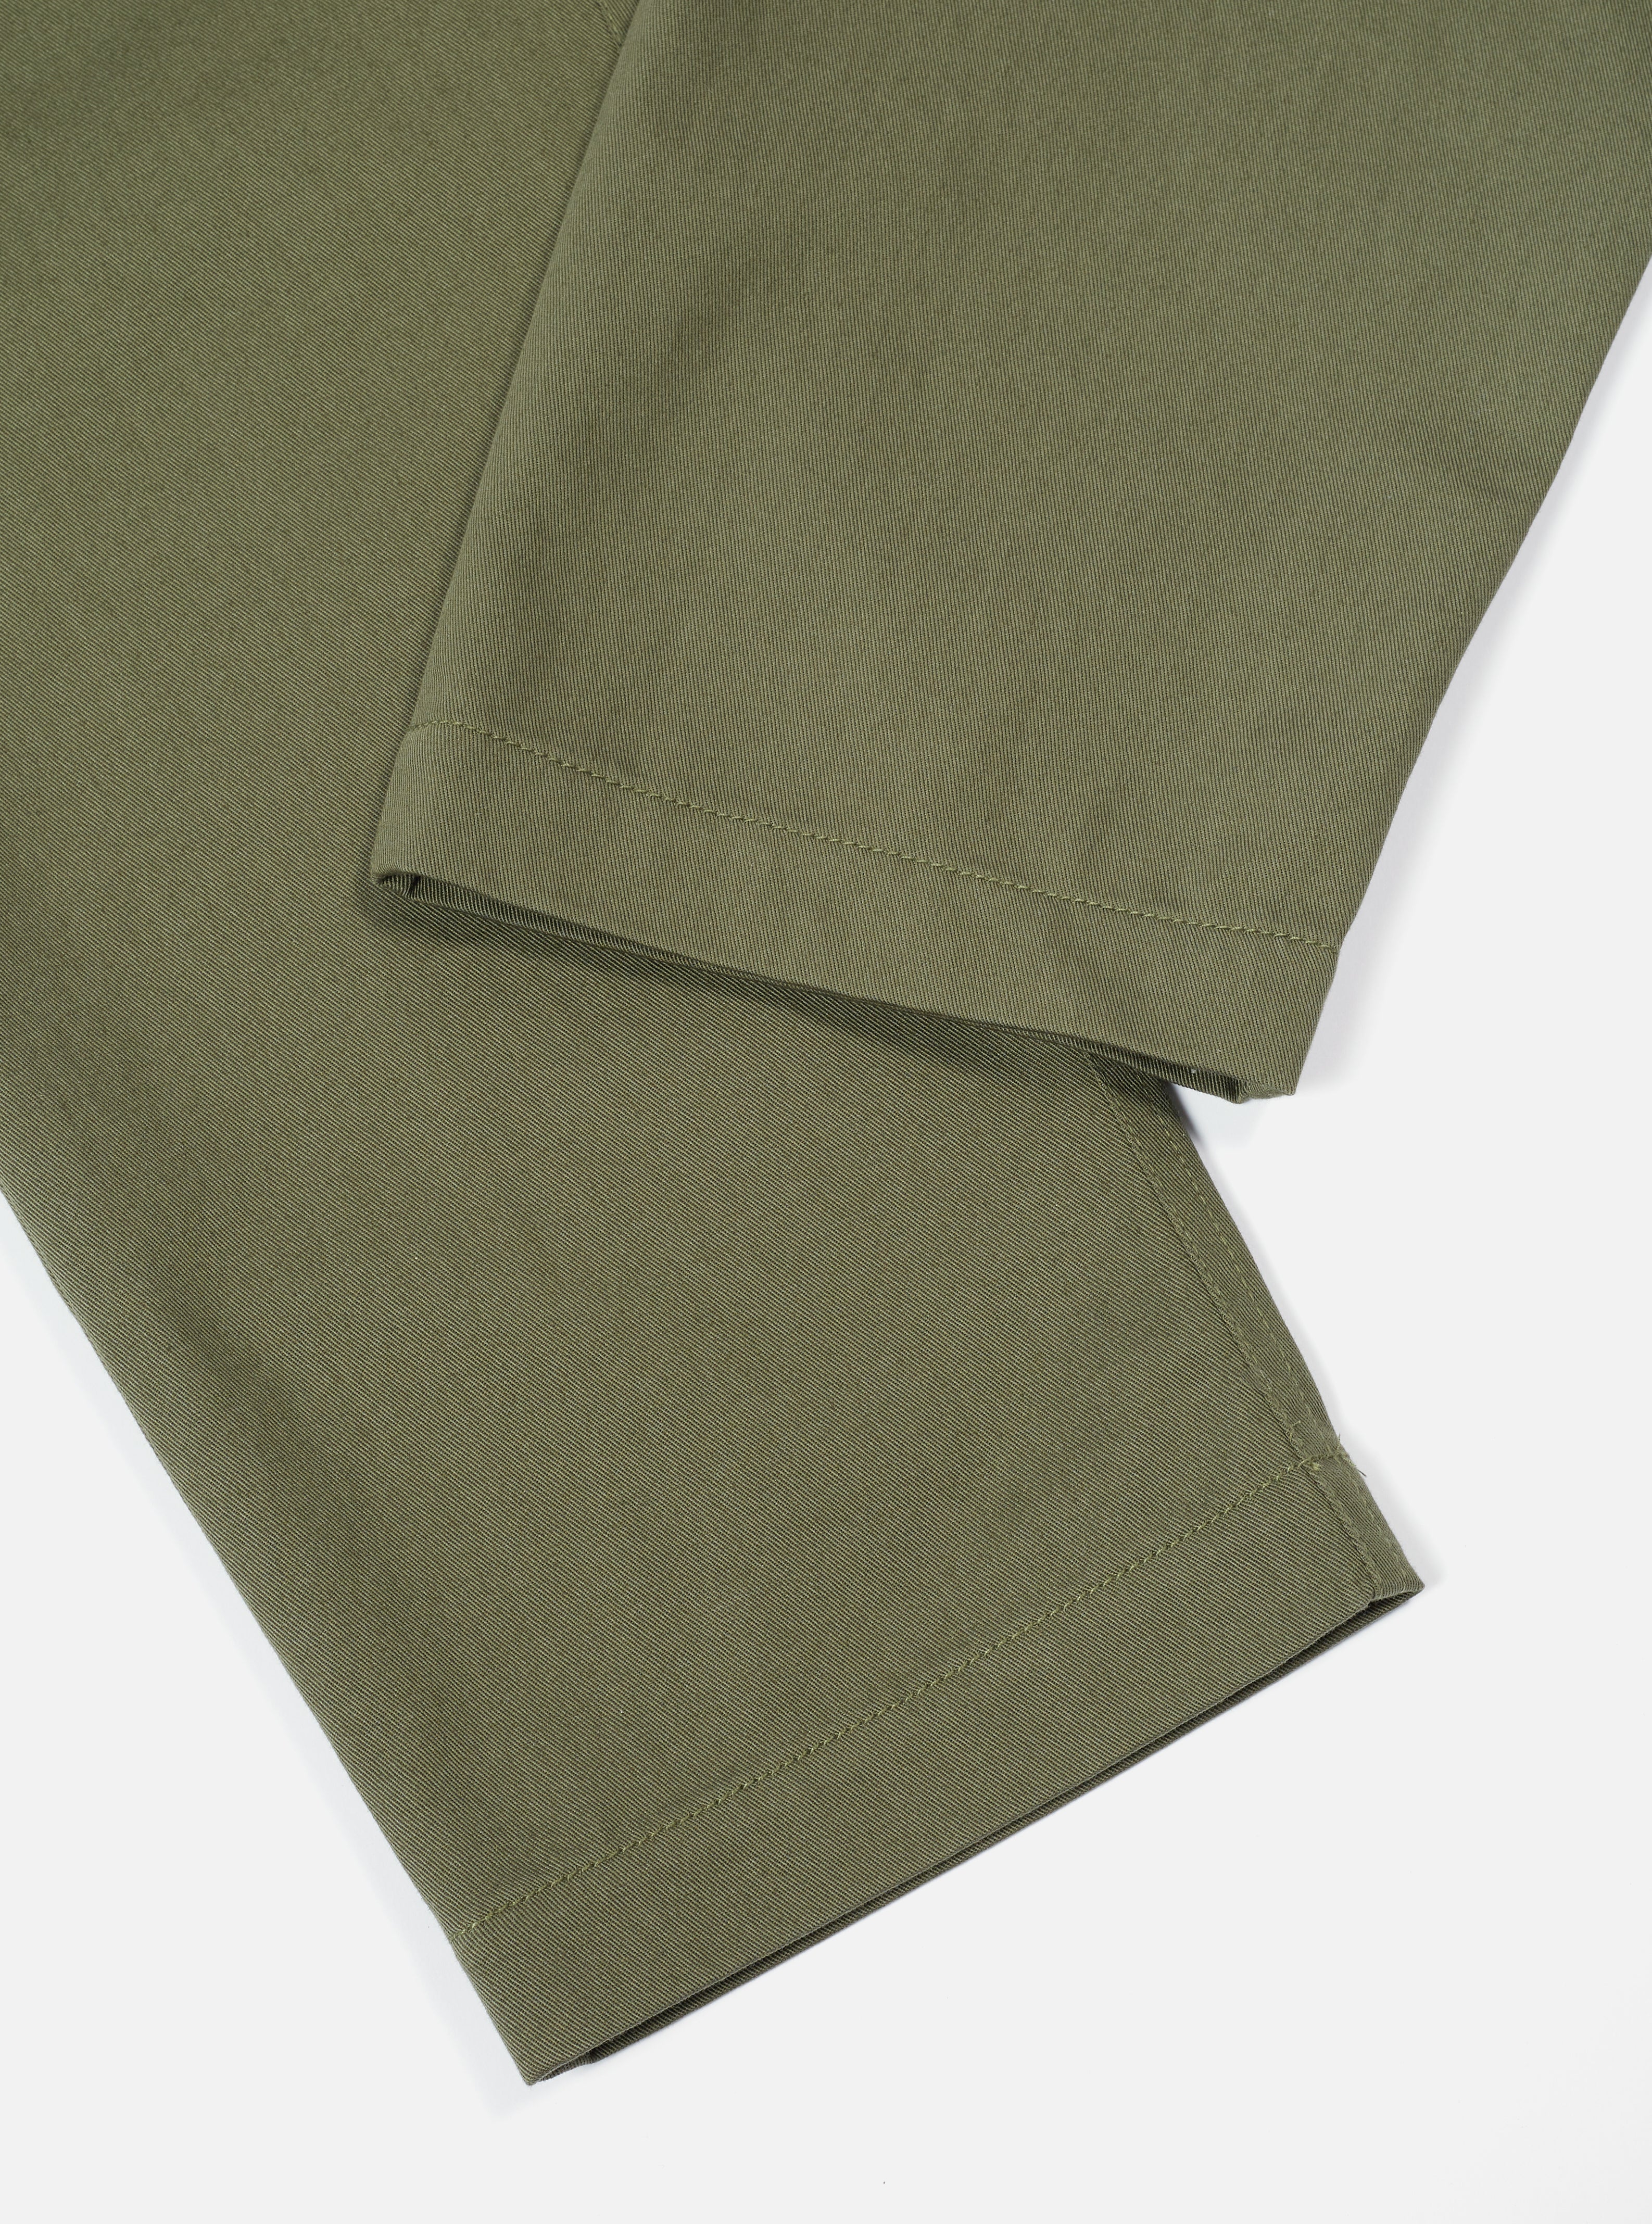 Universal Works Military Chino in Light Olive Twill